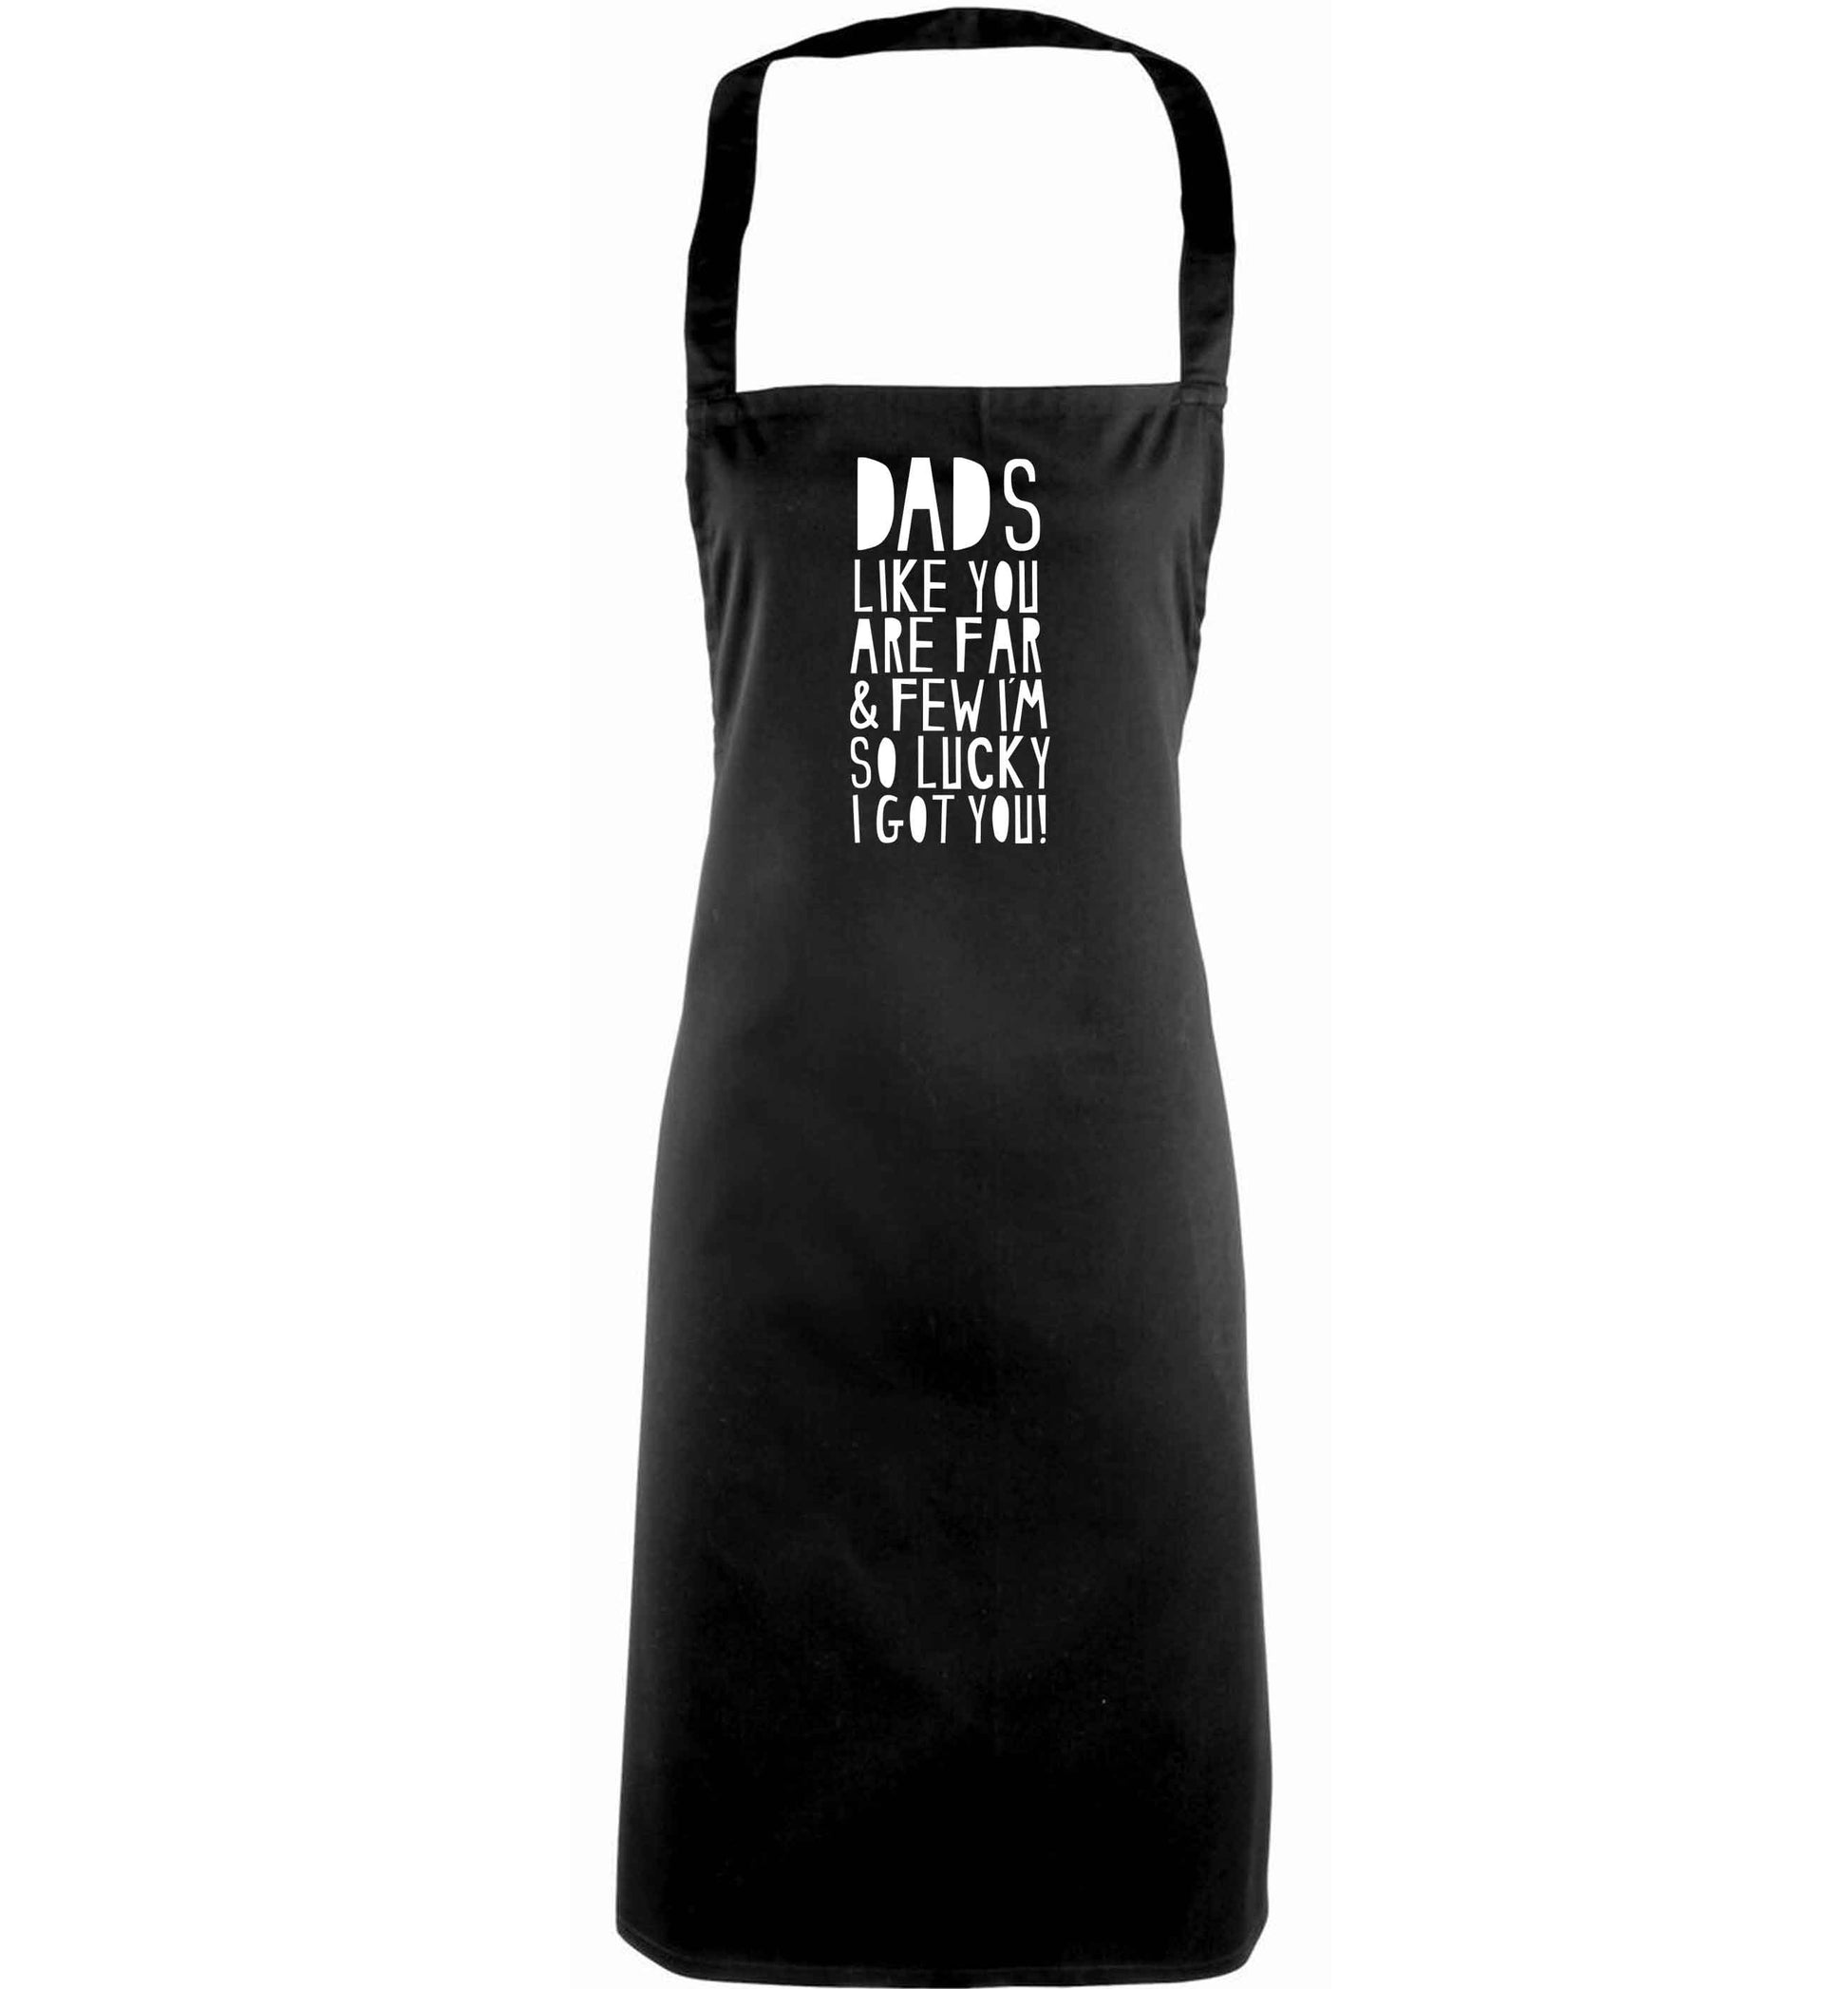 Dads like you are far and few I'm so luck I got you! adults black apron